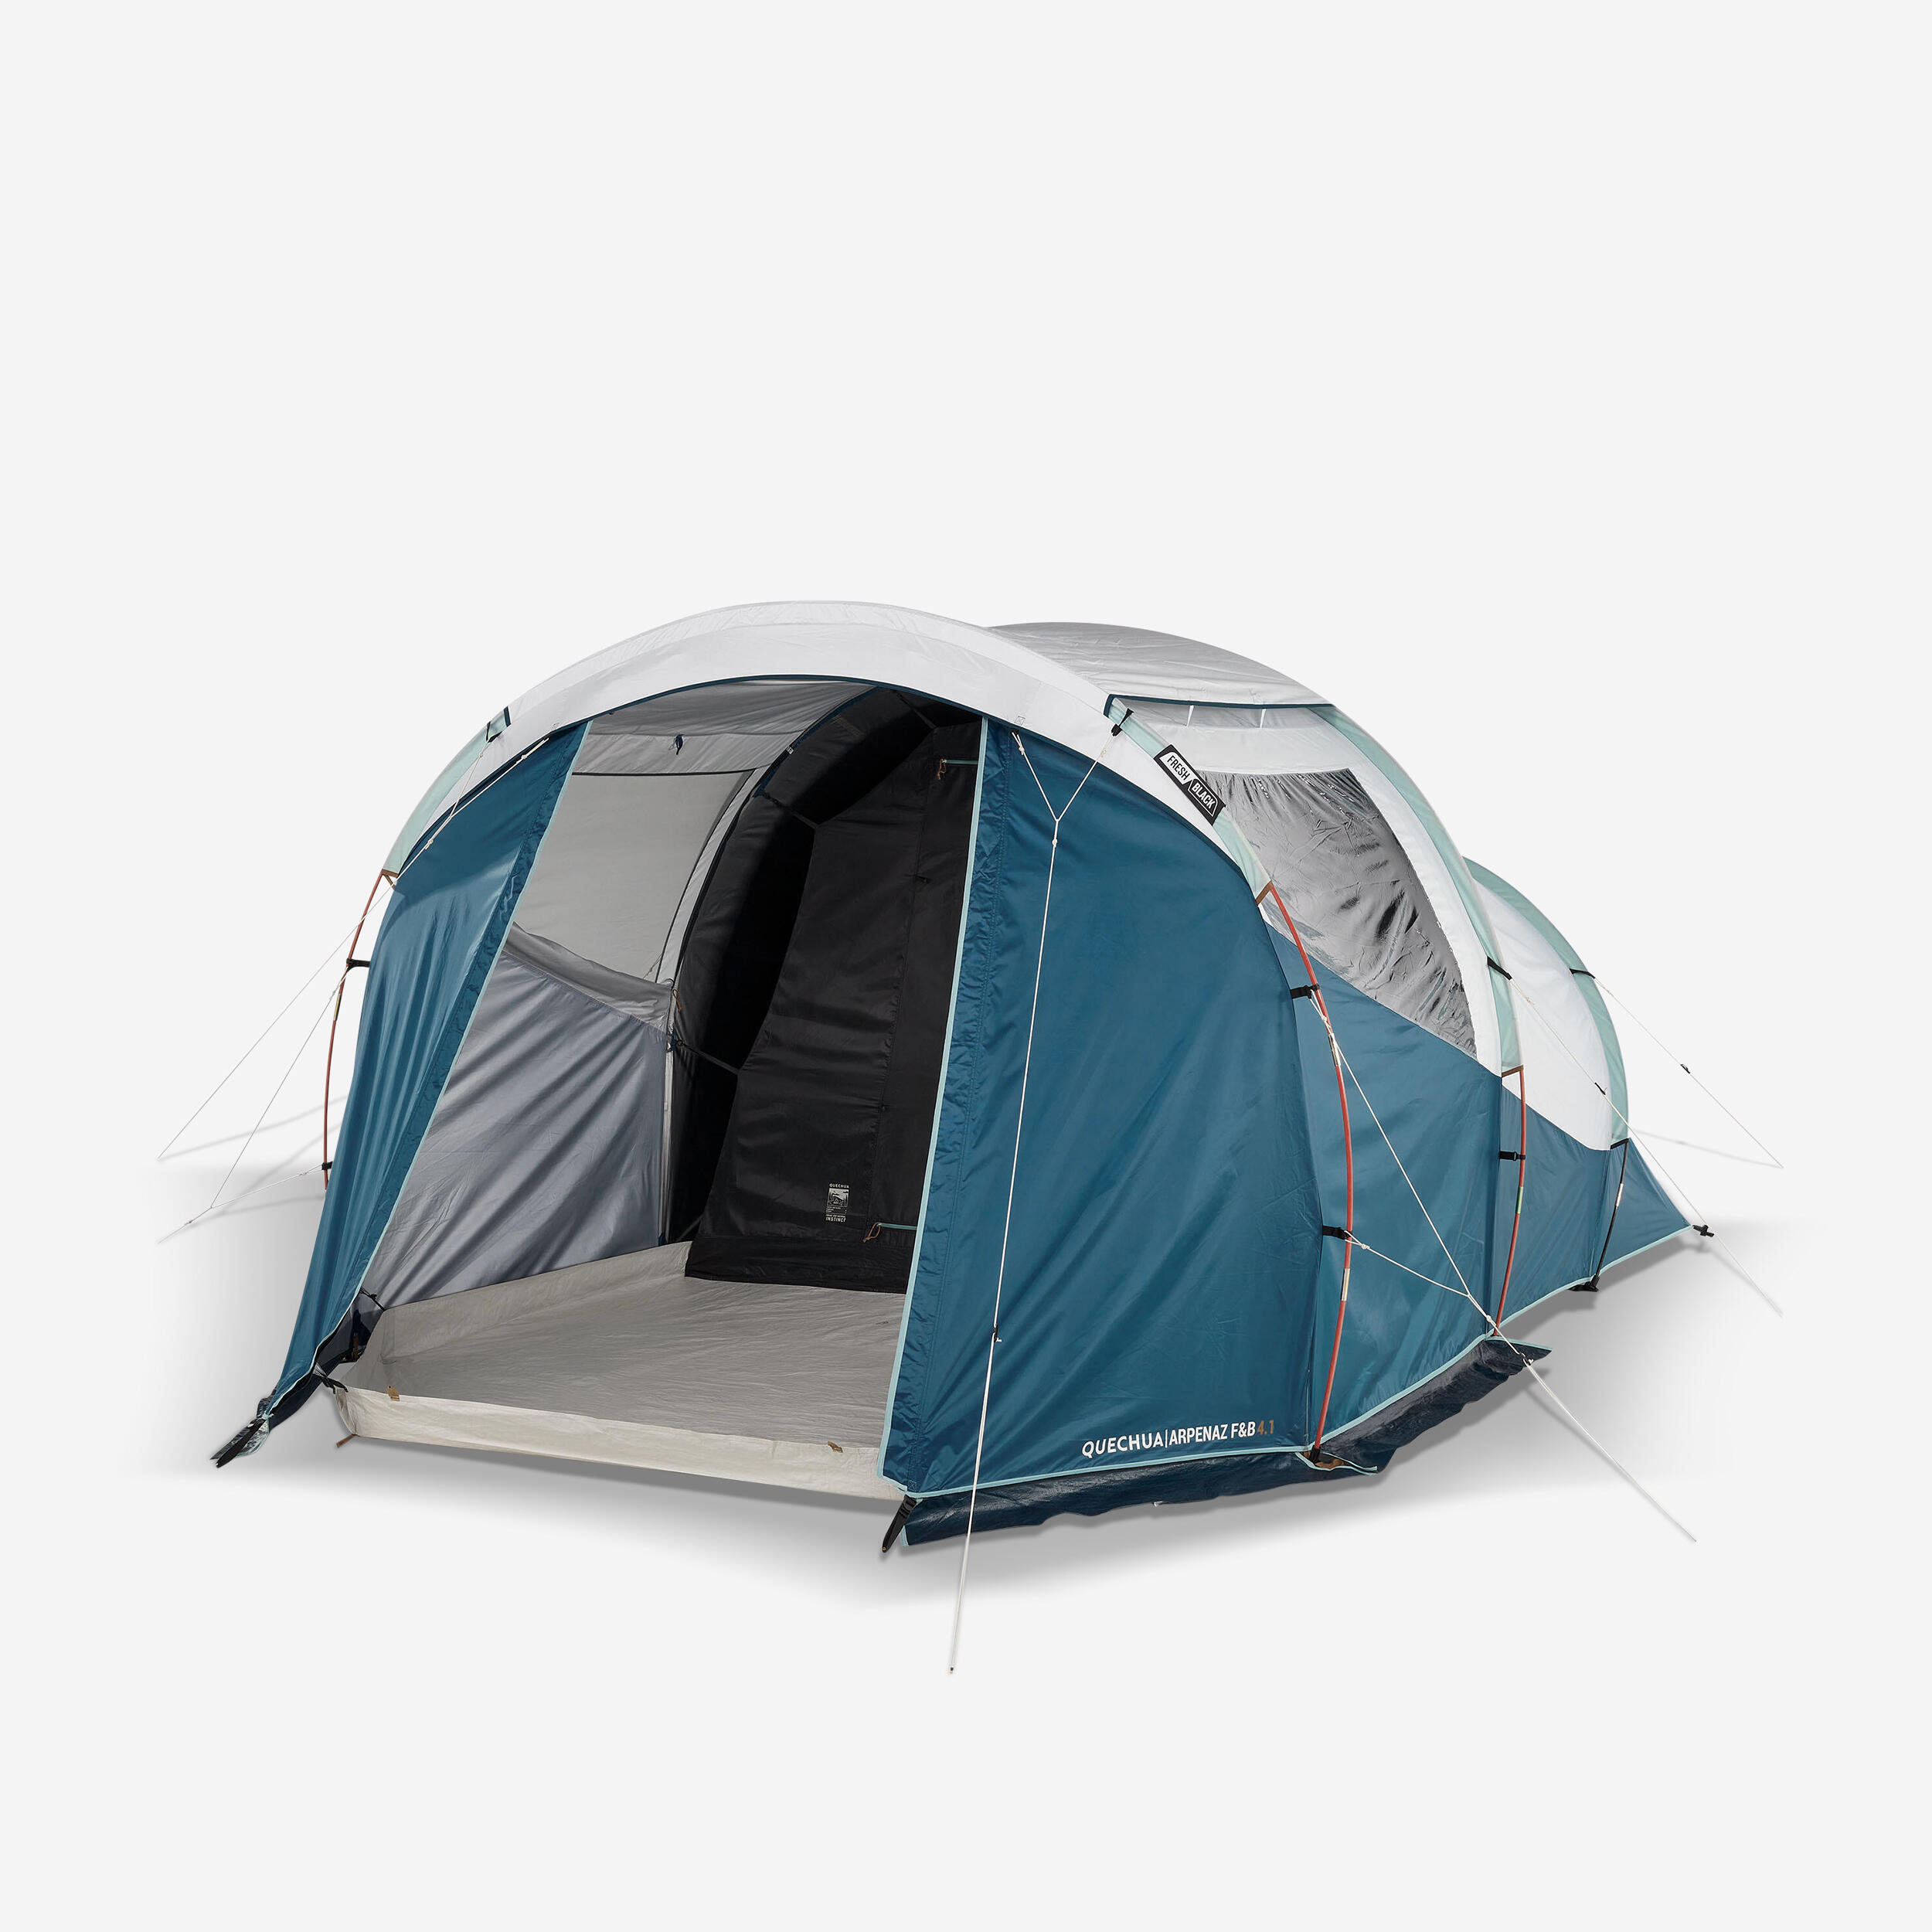 Camping 4-Person Tent - 4.1 Blue